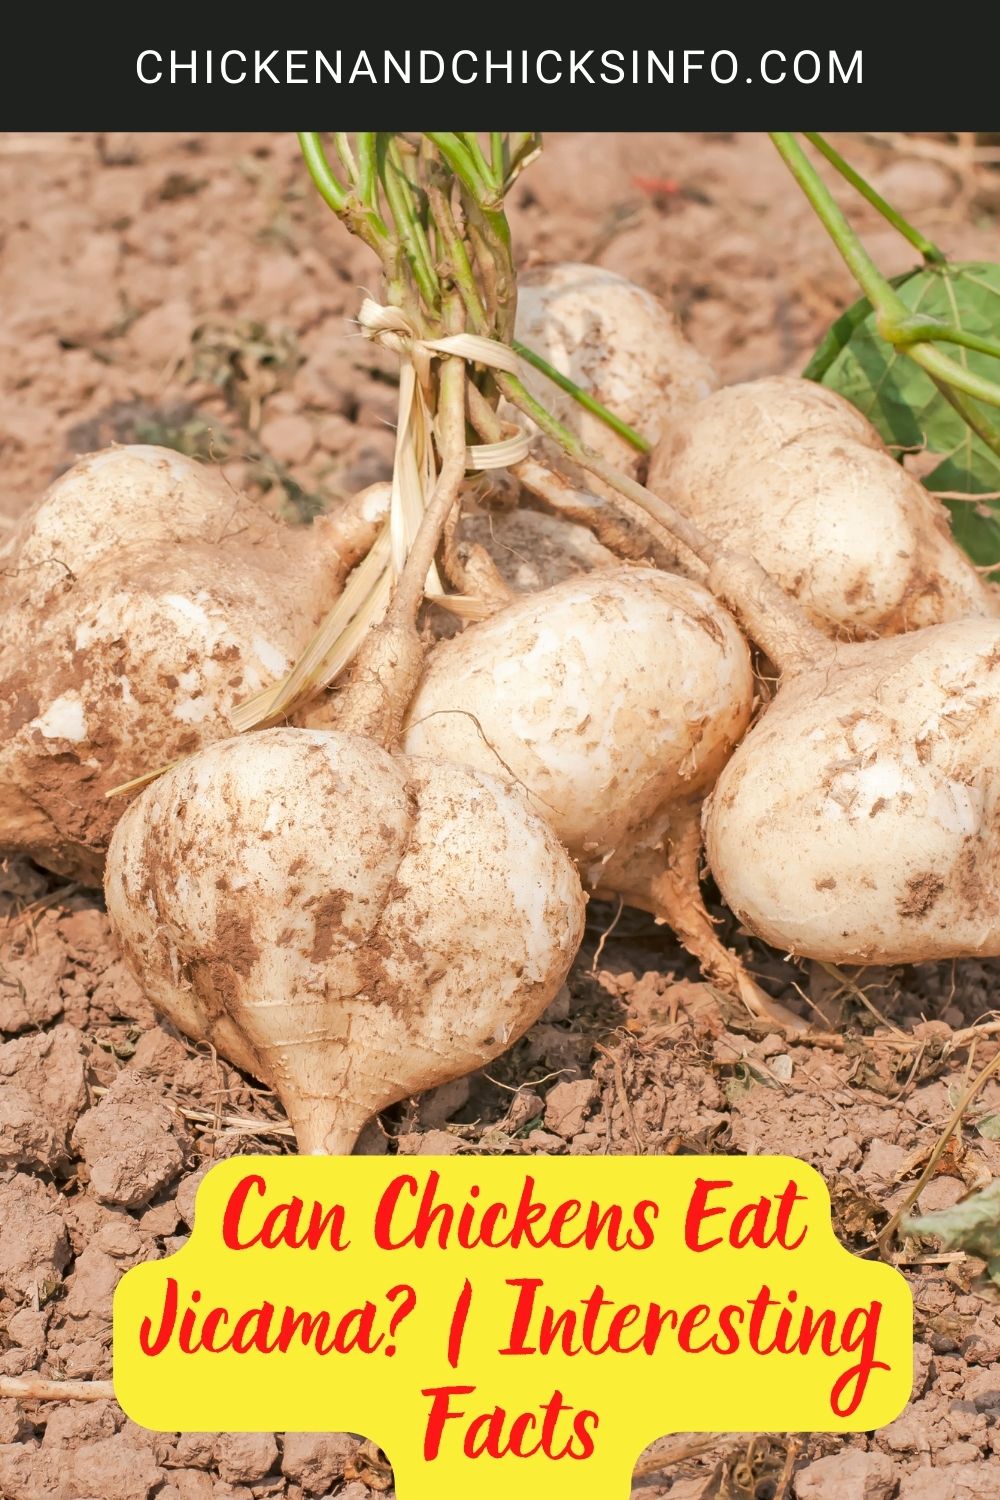 Can Chickens Eat Jicama? | Interesting Facts poster.
